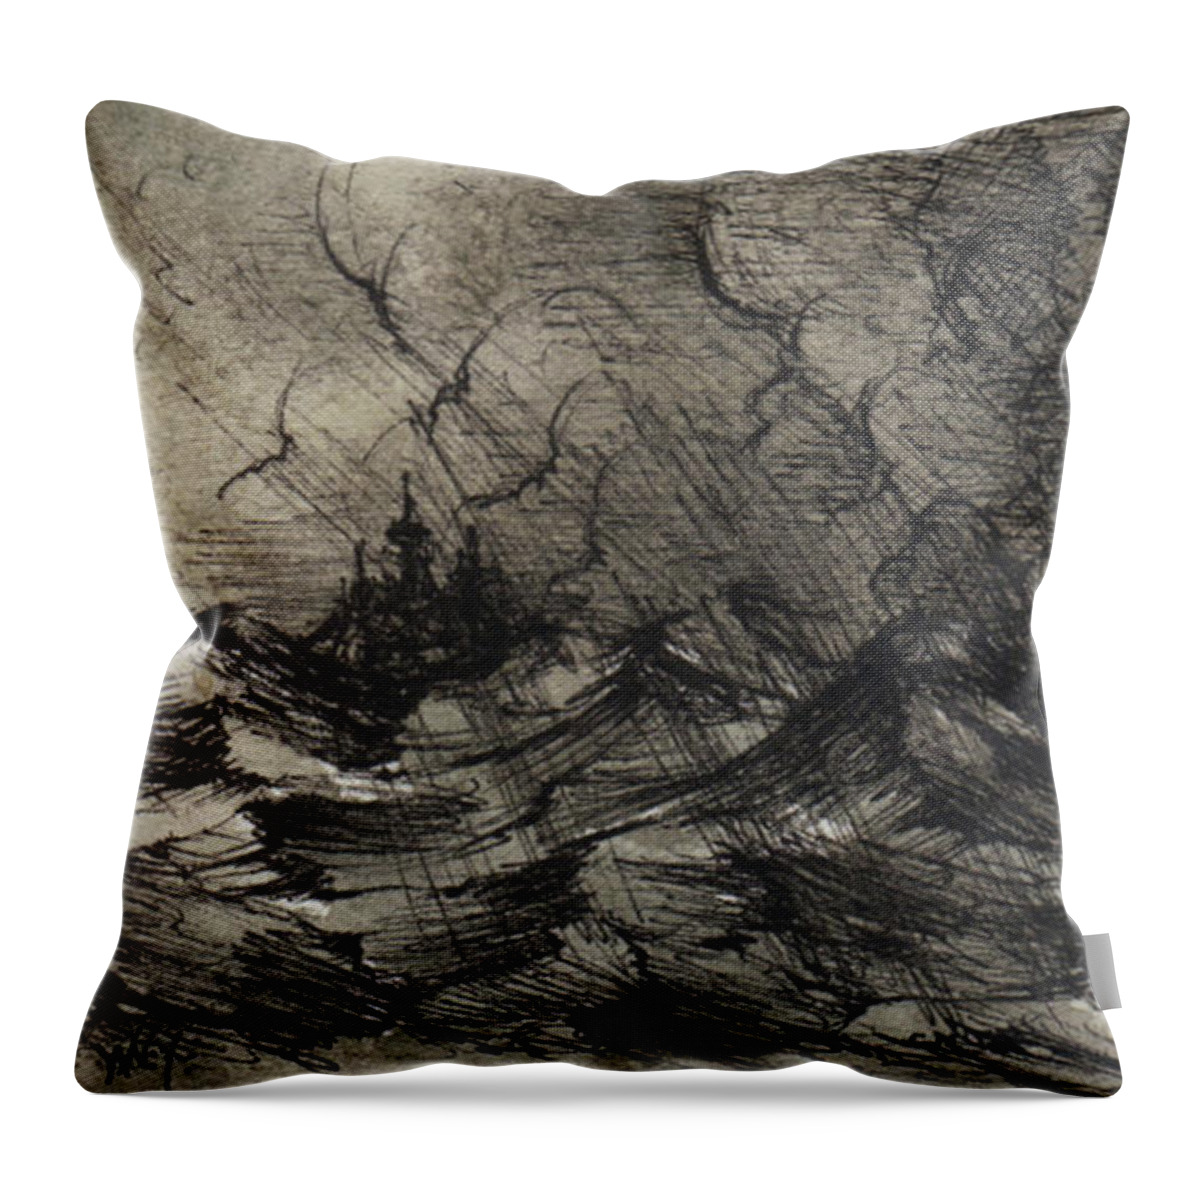 Storm Throw Pillow featuring the drawing A Coming Storm by William Russell Nowicki